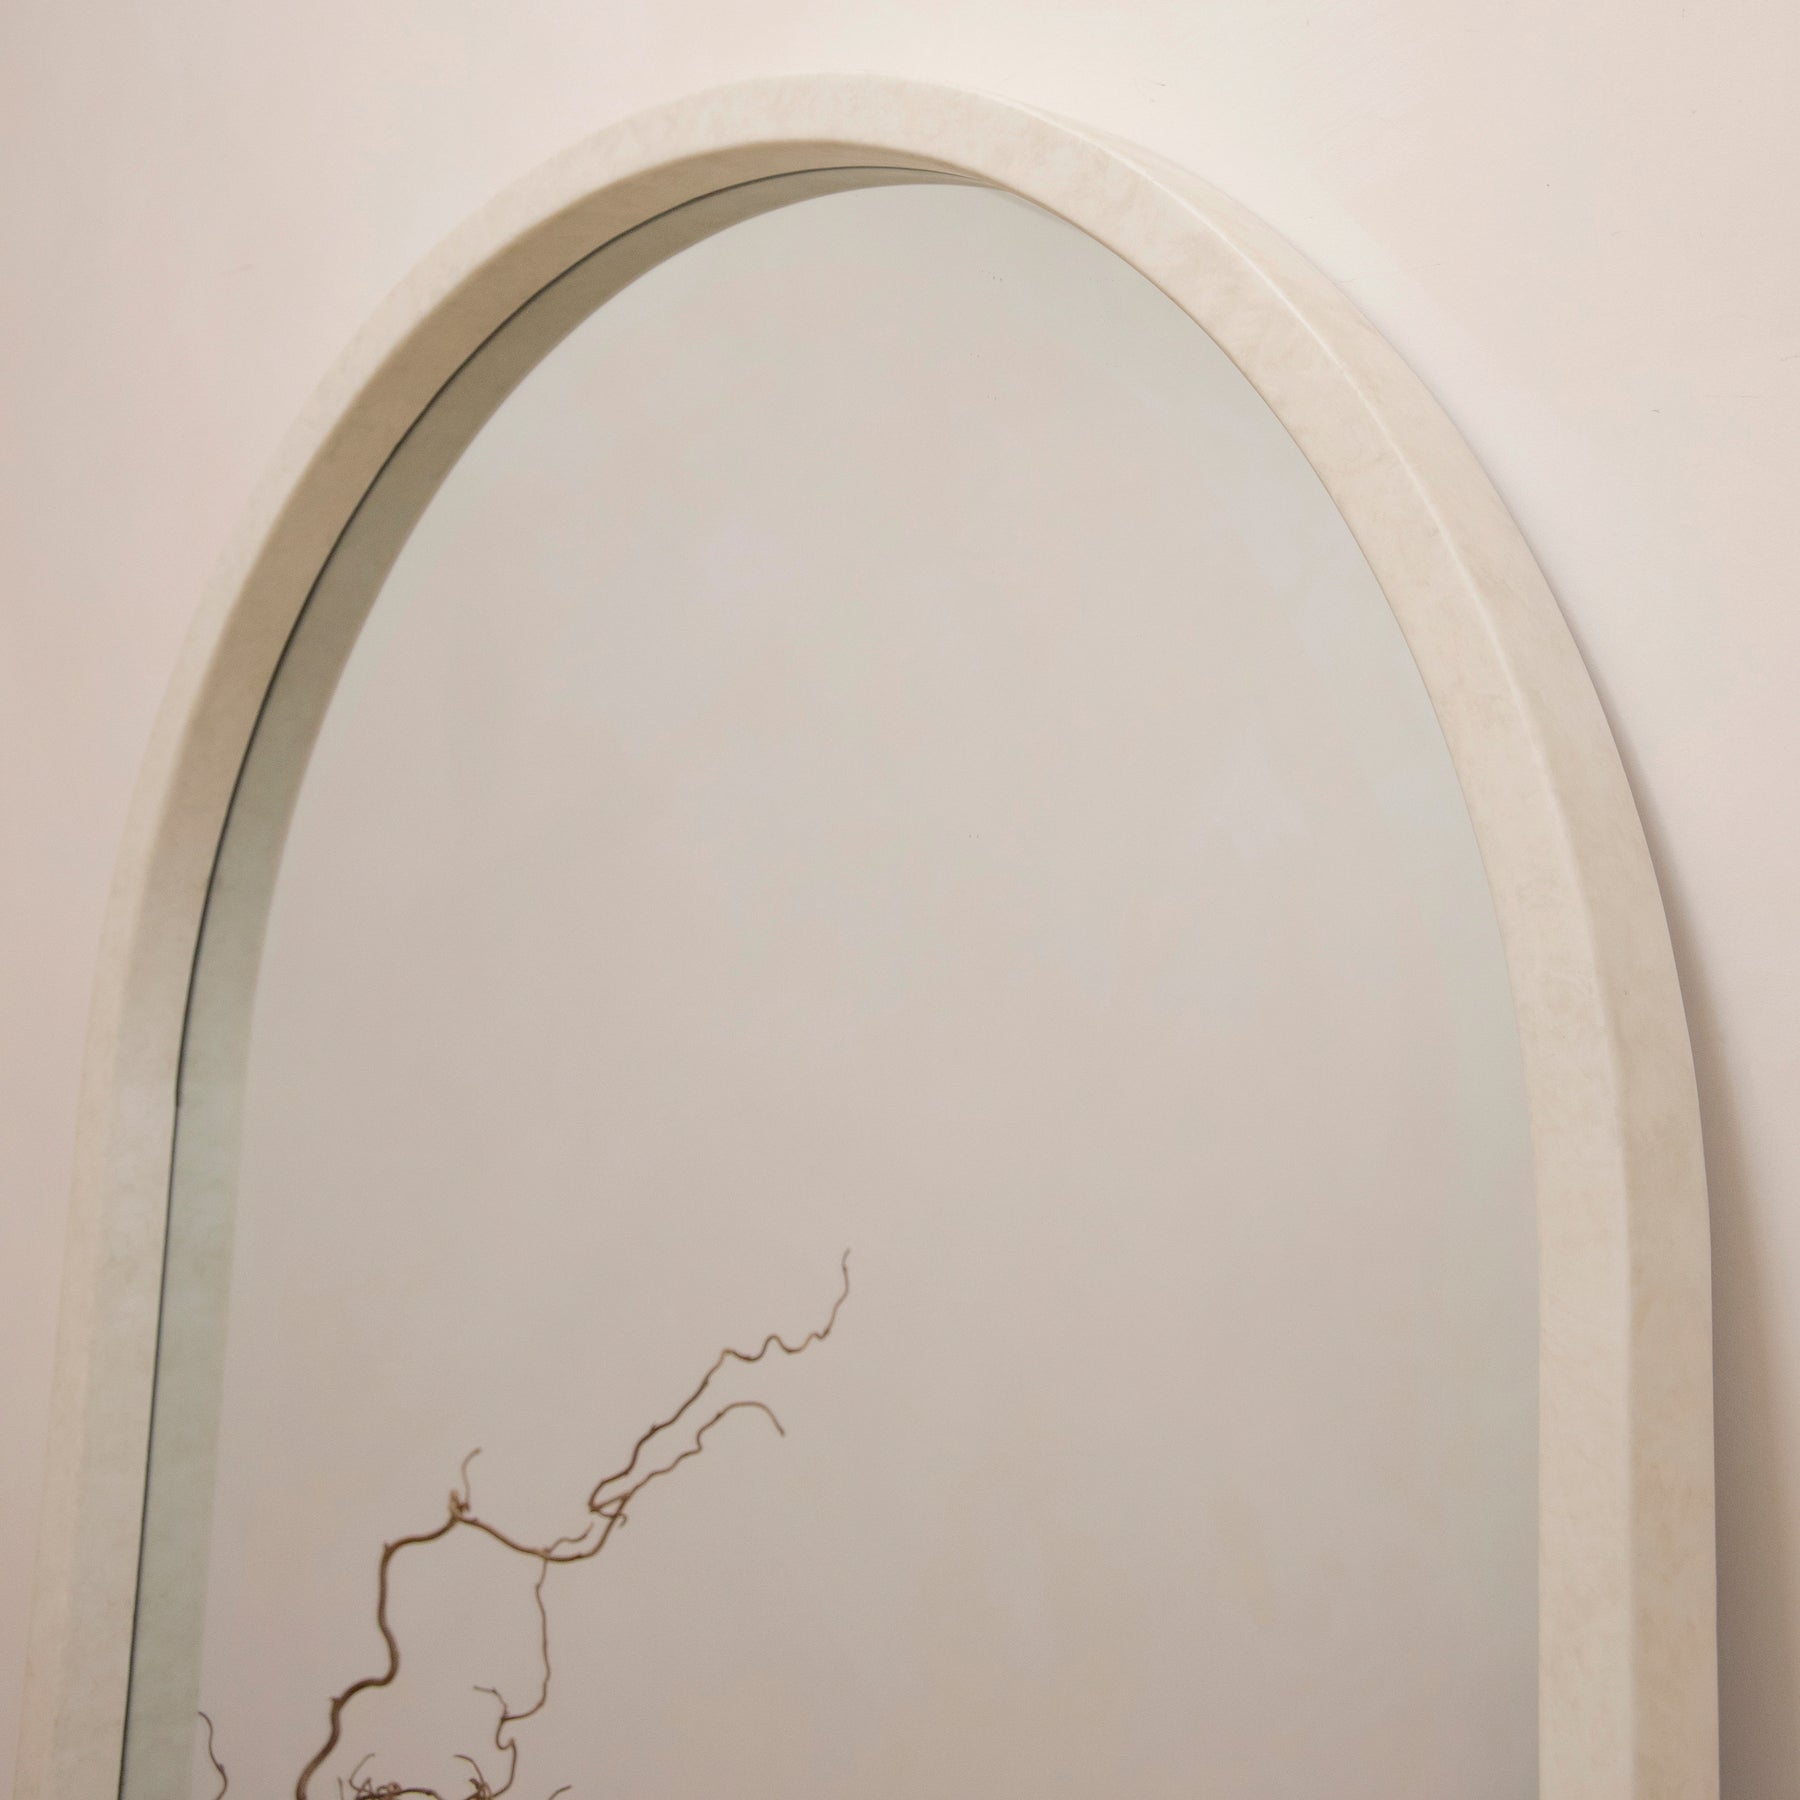 Wide shot of Full Length Extra Large Arched Concrete Mirror arched frame design